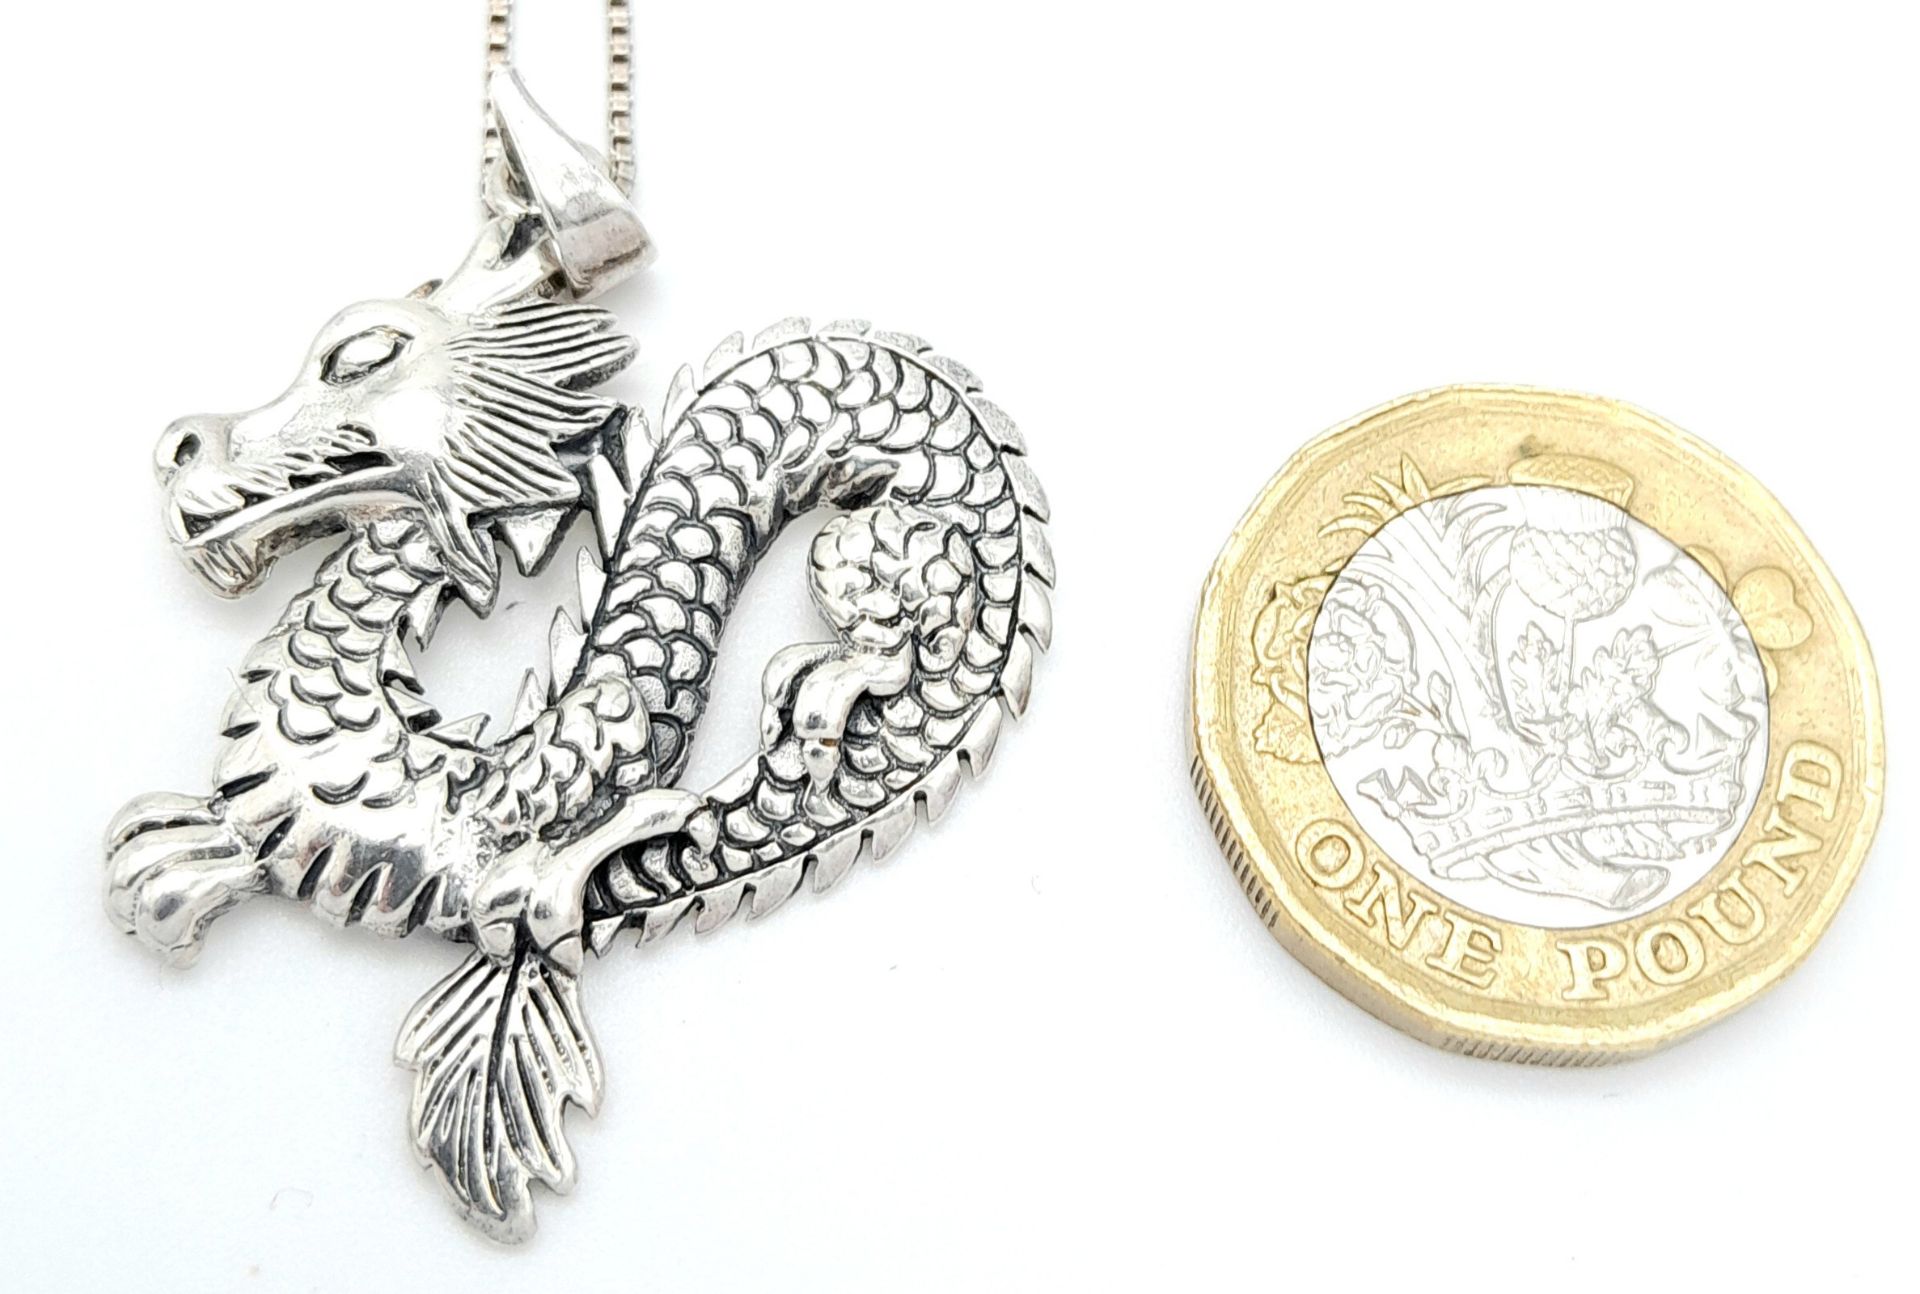 A Sterling Silver Dragon Pendant on 925 Silver Chain. 4.5cm pendant, 62cm chain. 9.7g total weight. - Bild 2 aus 5